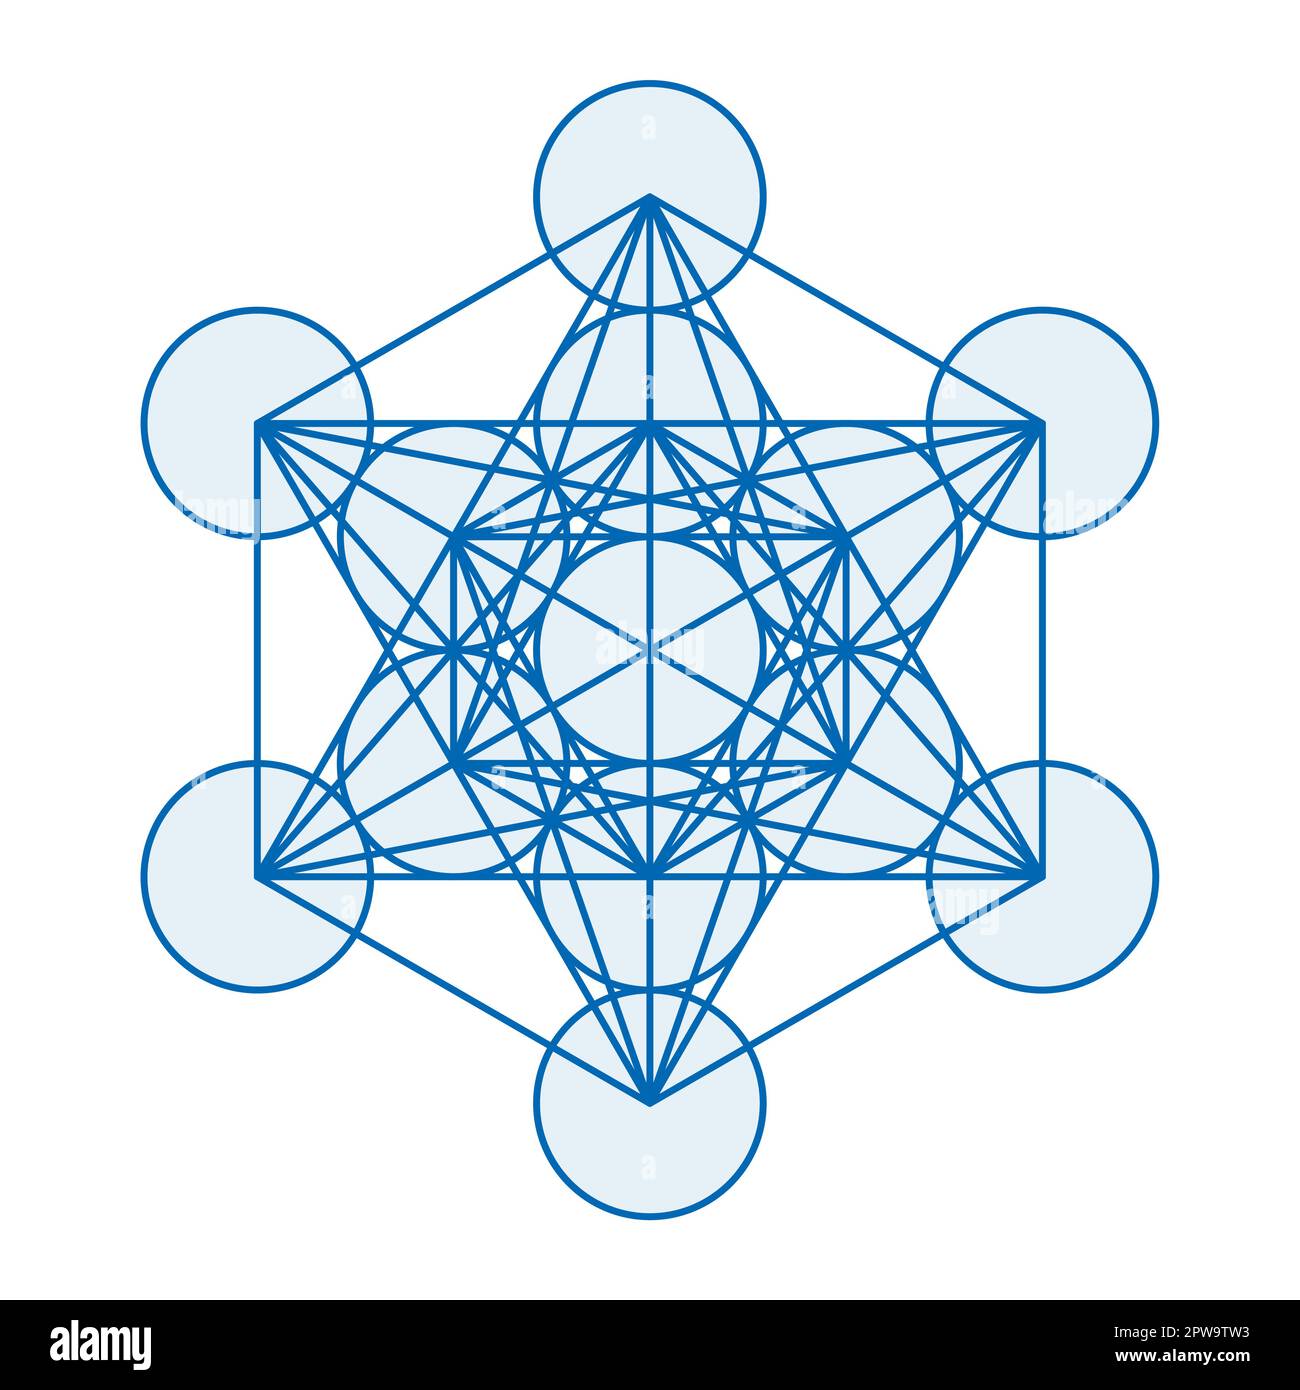 Blue Metatrons Cube, mystical symbol, derived from the Flower of Life Stock Vector